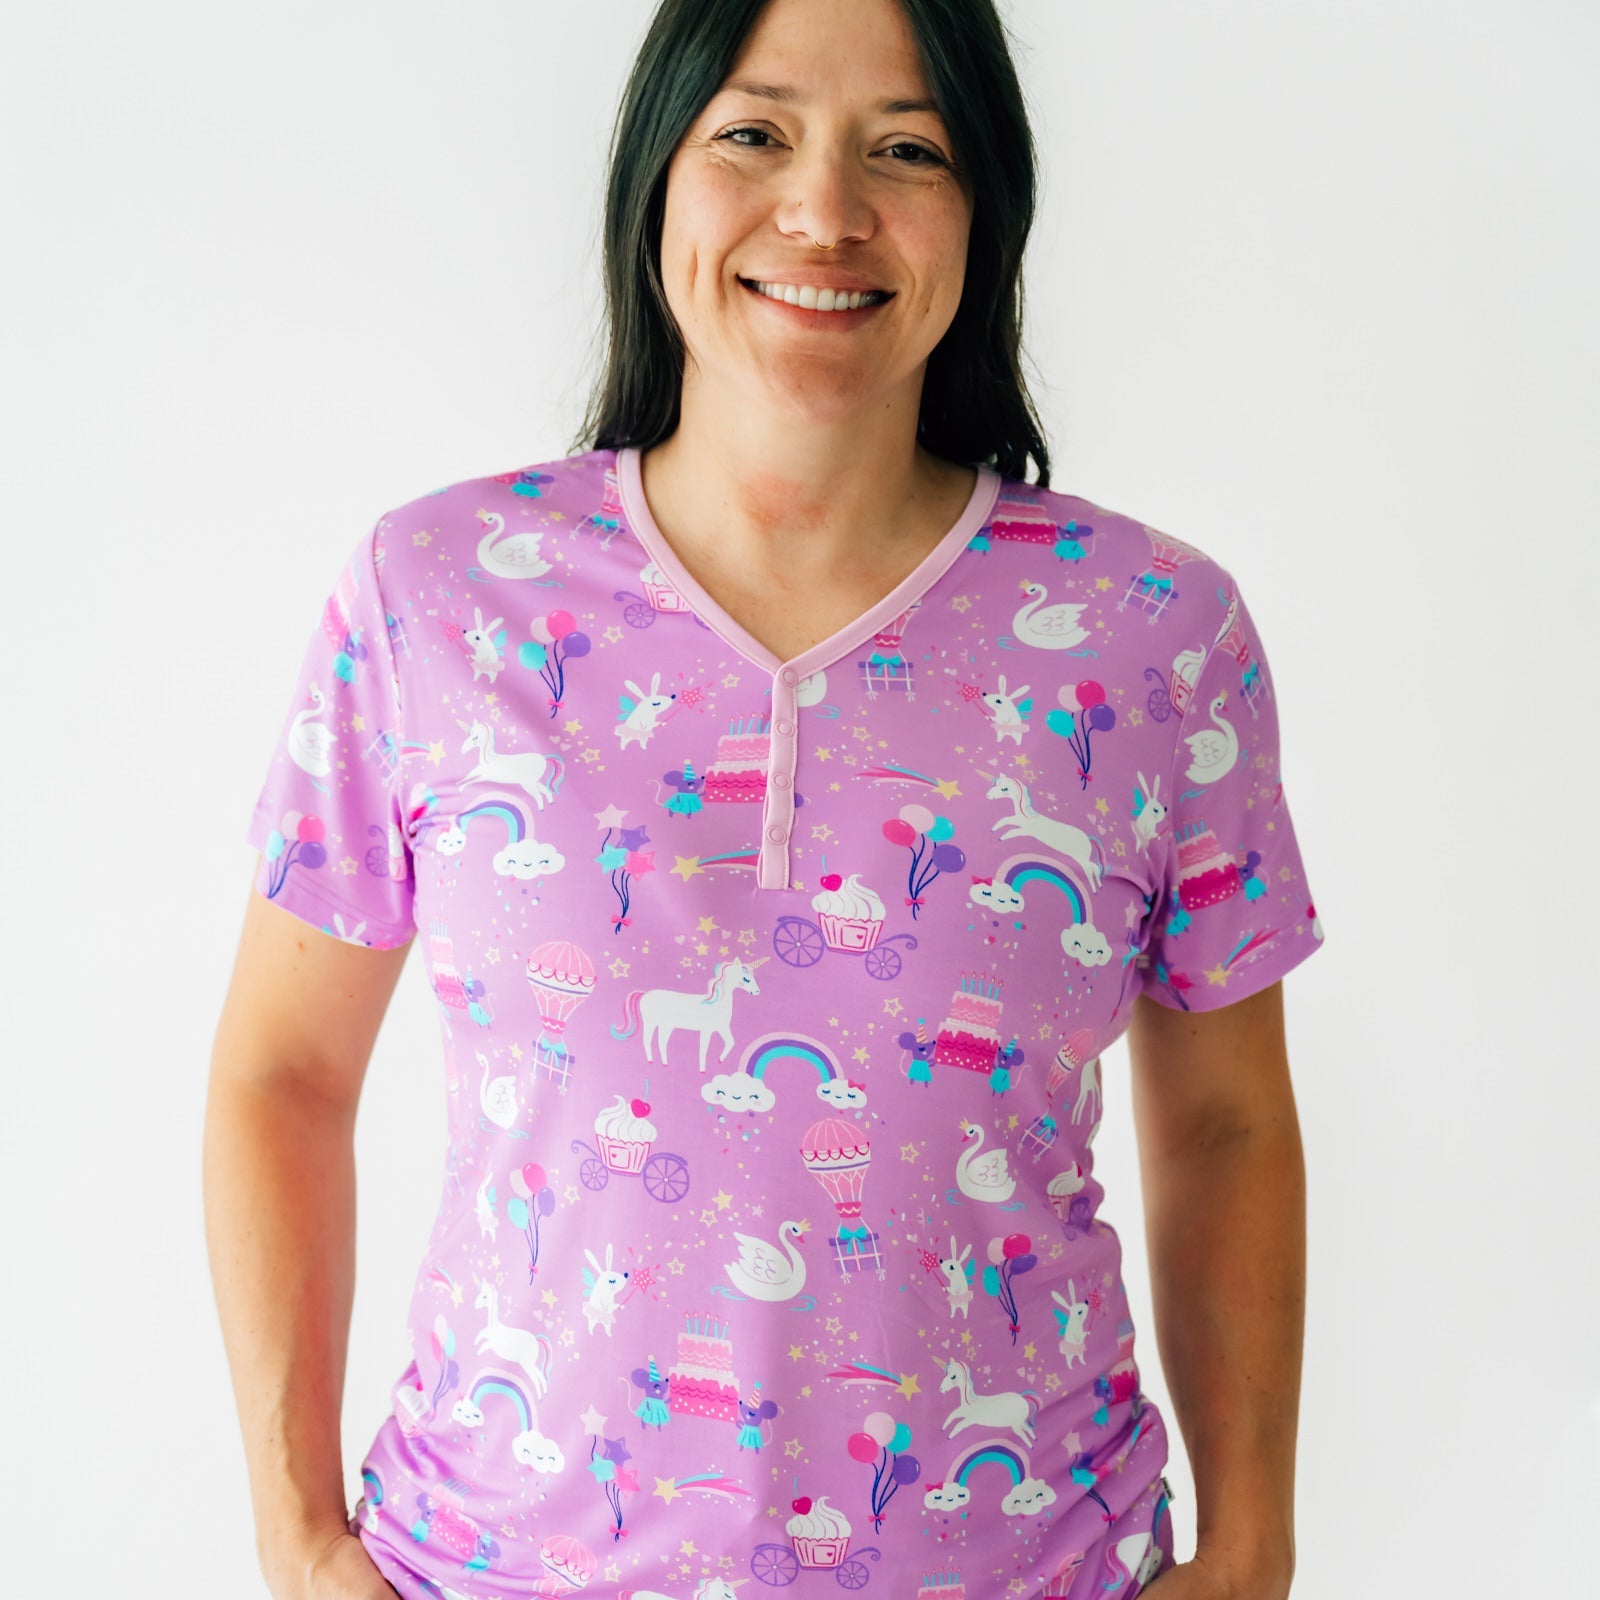 Close up image of a woman wearing a Magical Birthday women's pj top